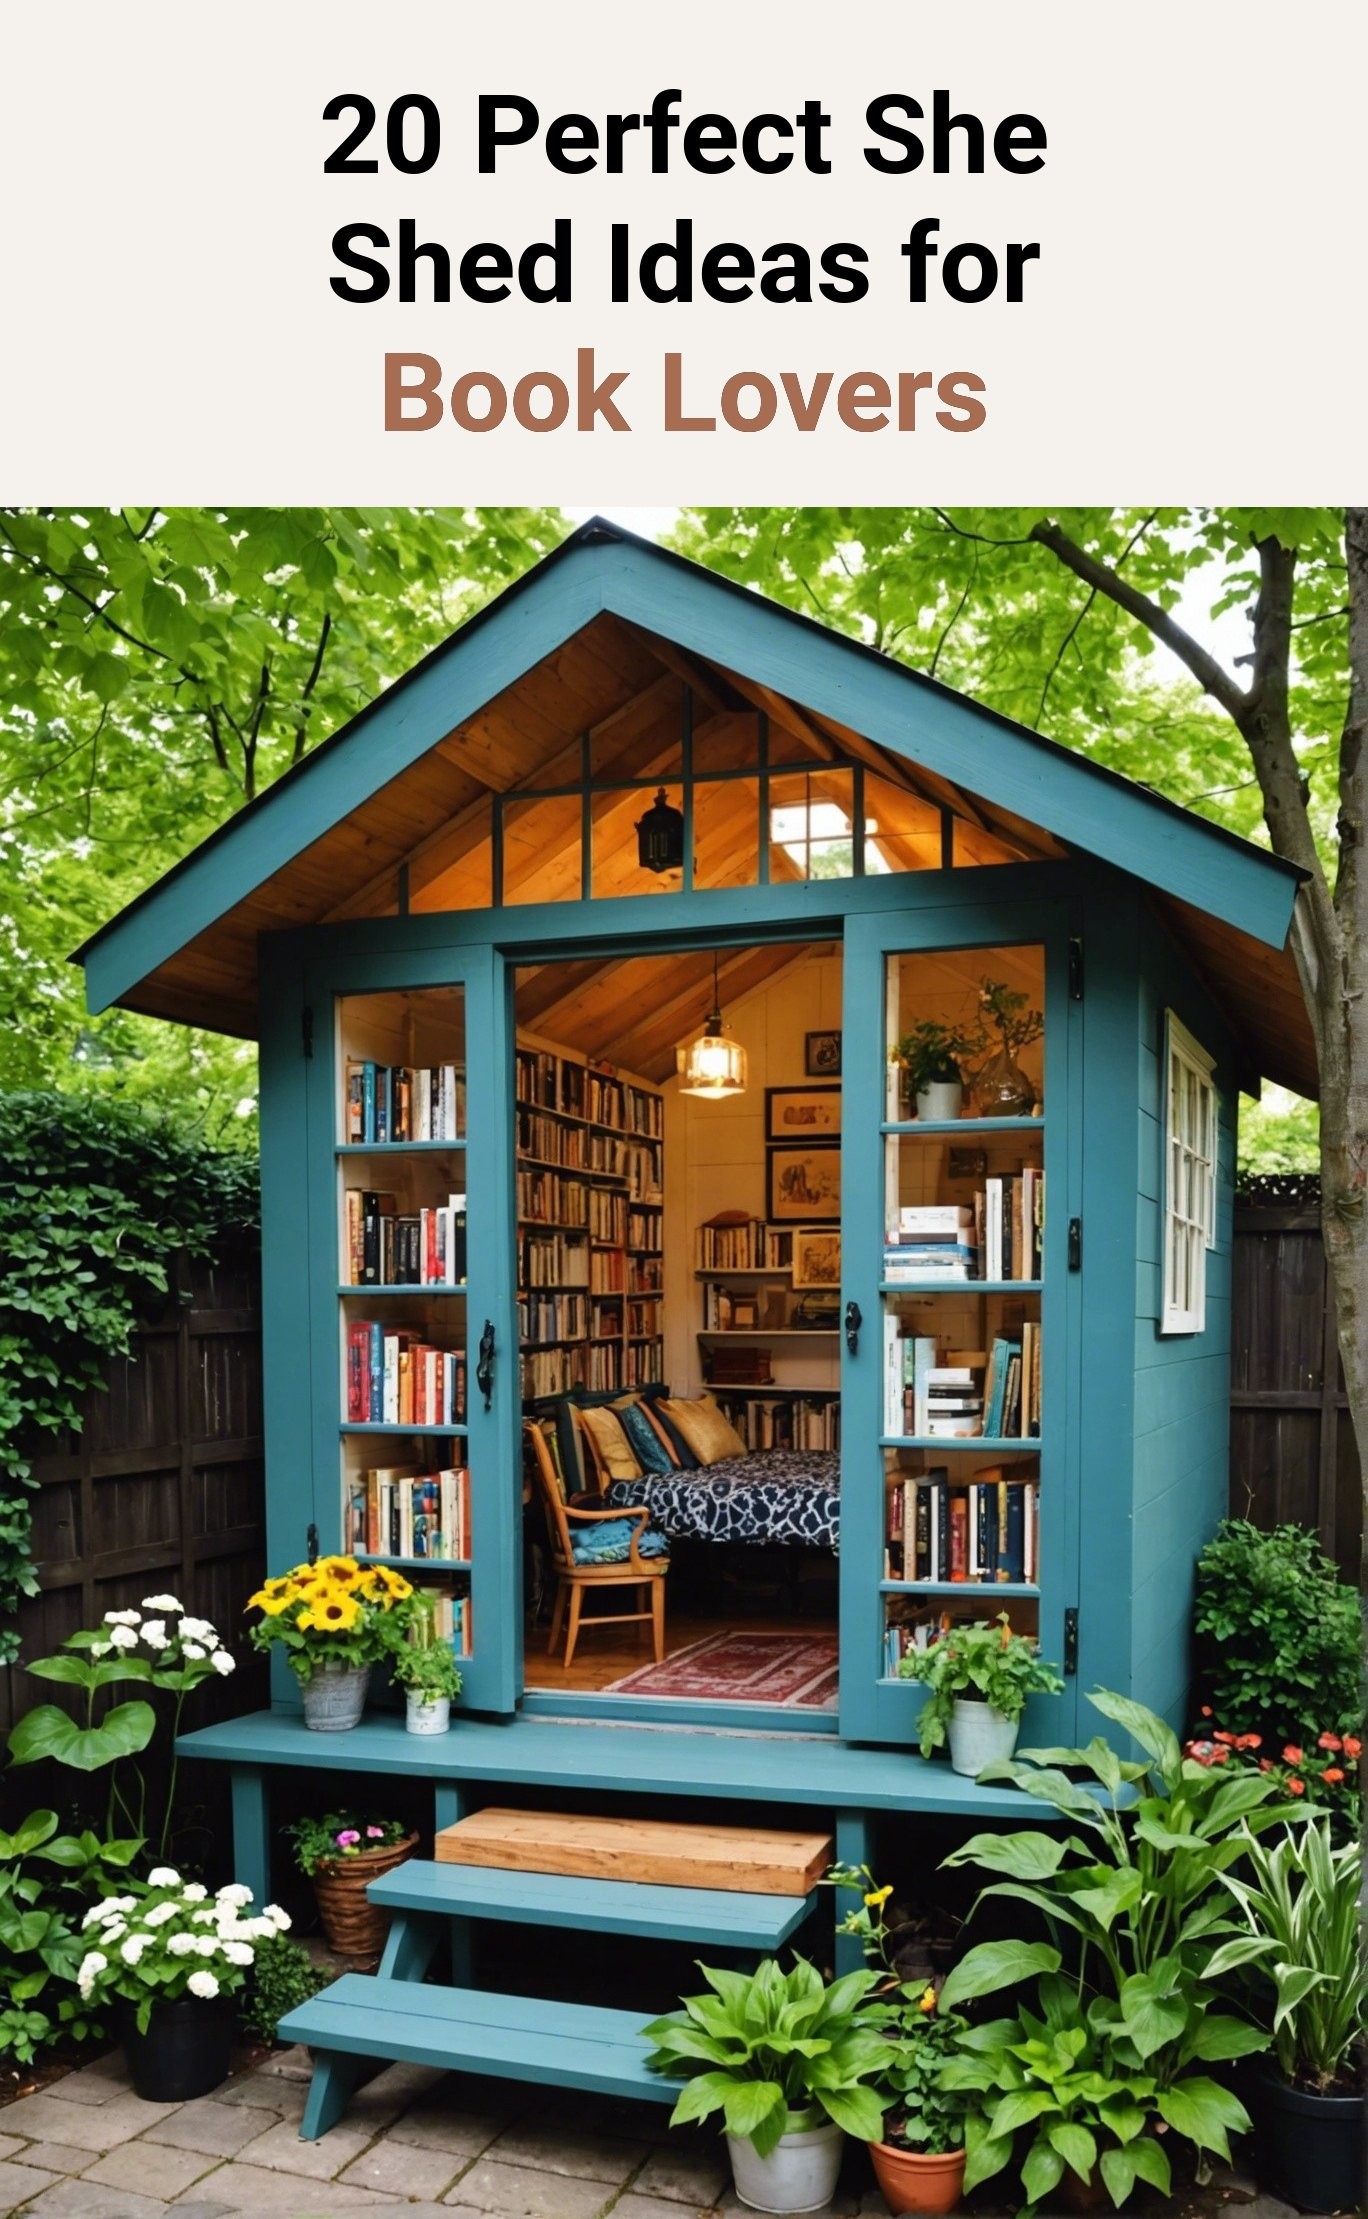 20 Perfect She Shed Ideas for Book Lovers